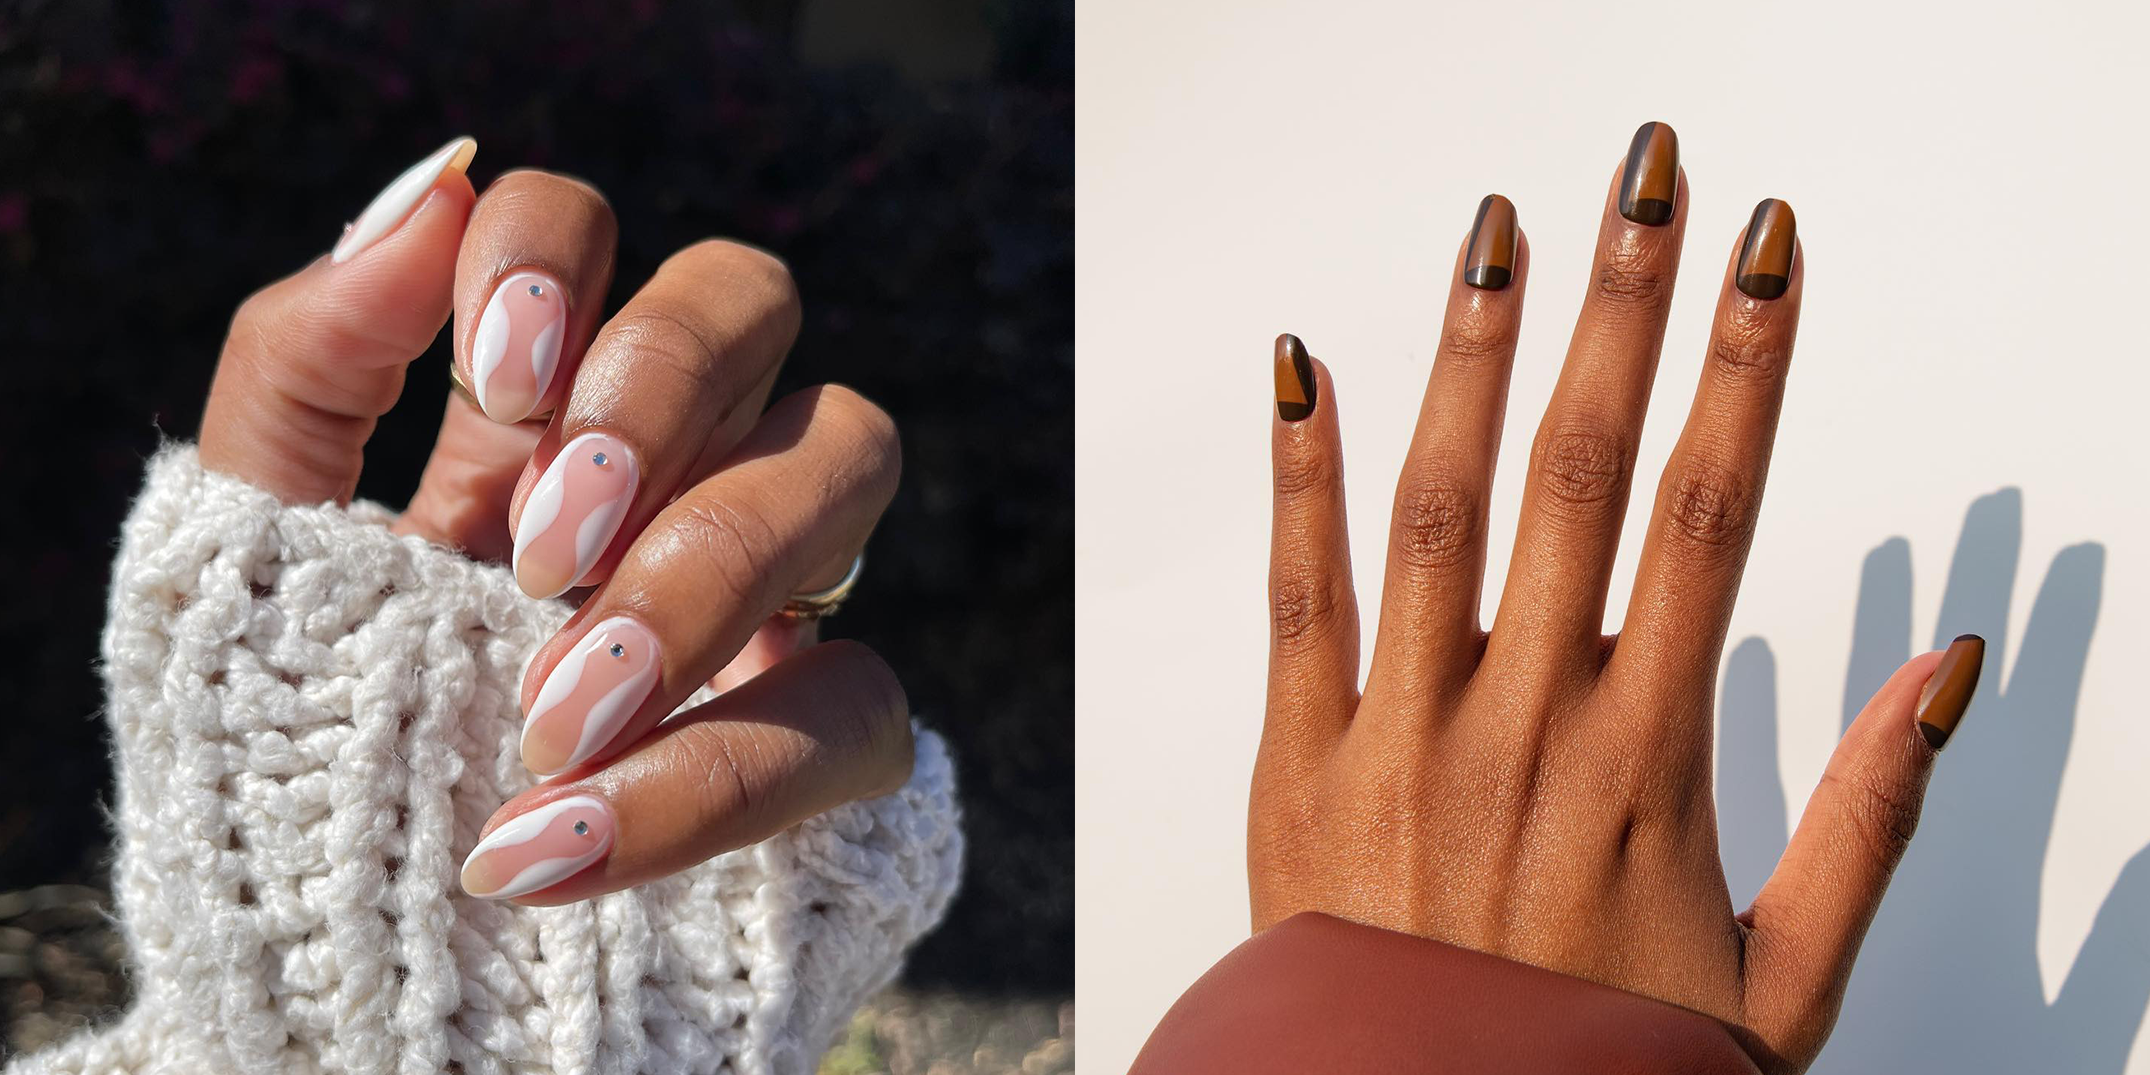 7 Almond Nail Designs To Try For A Stylish Summer Manicure